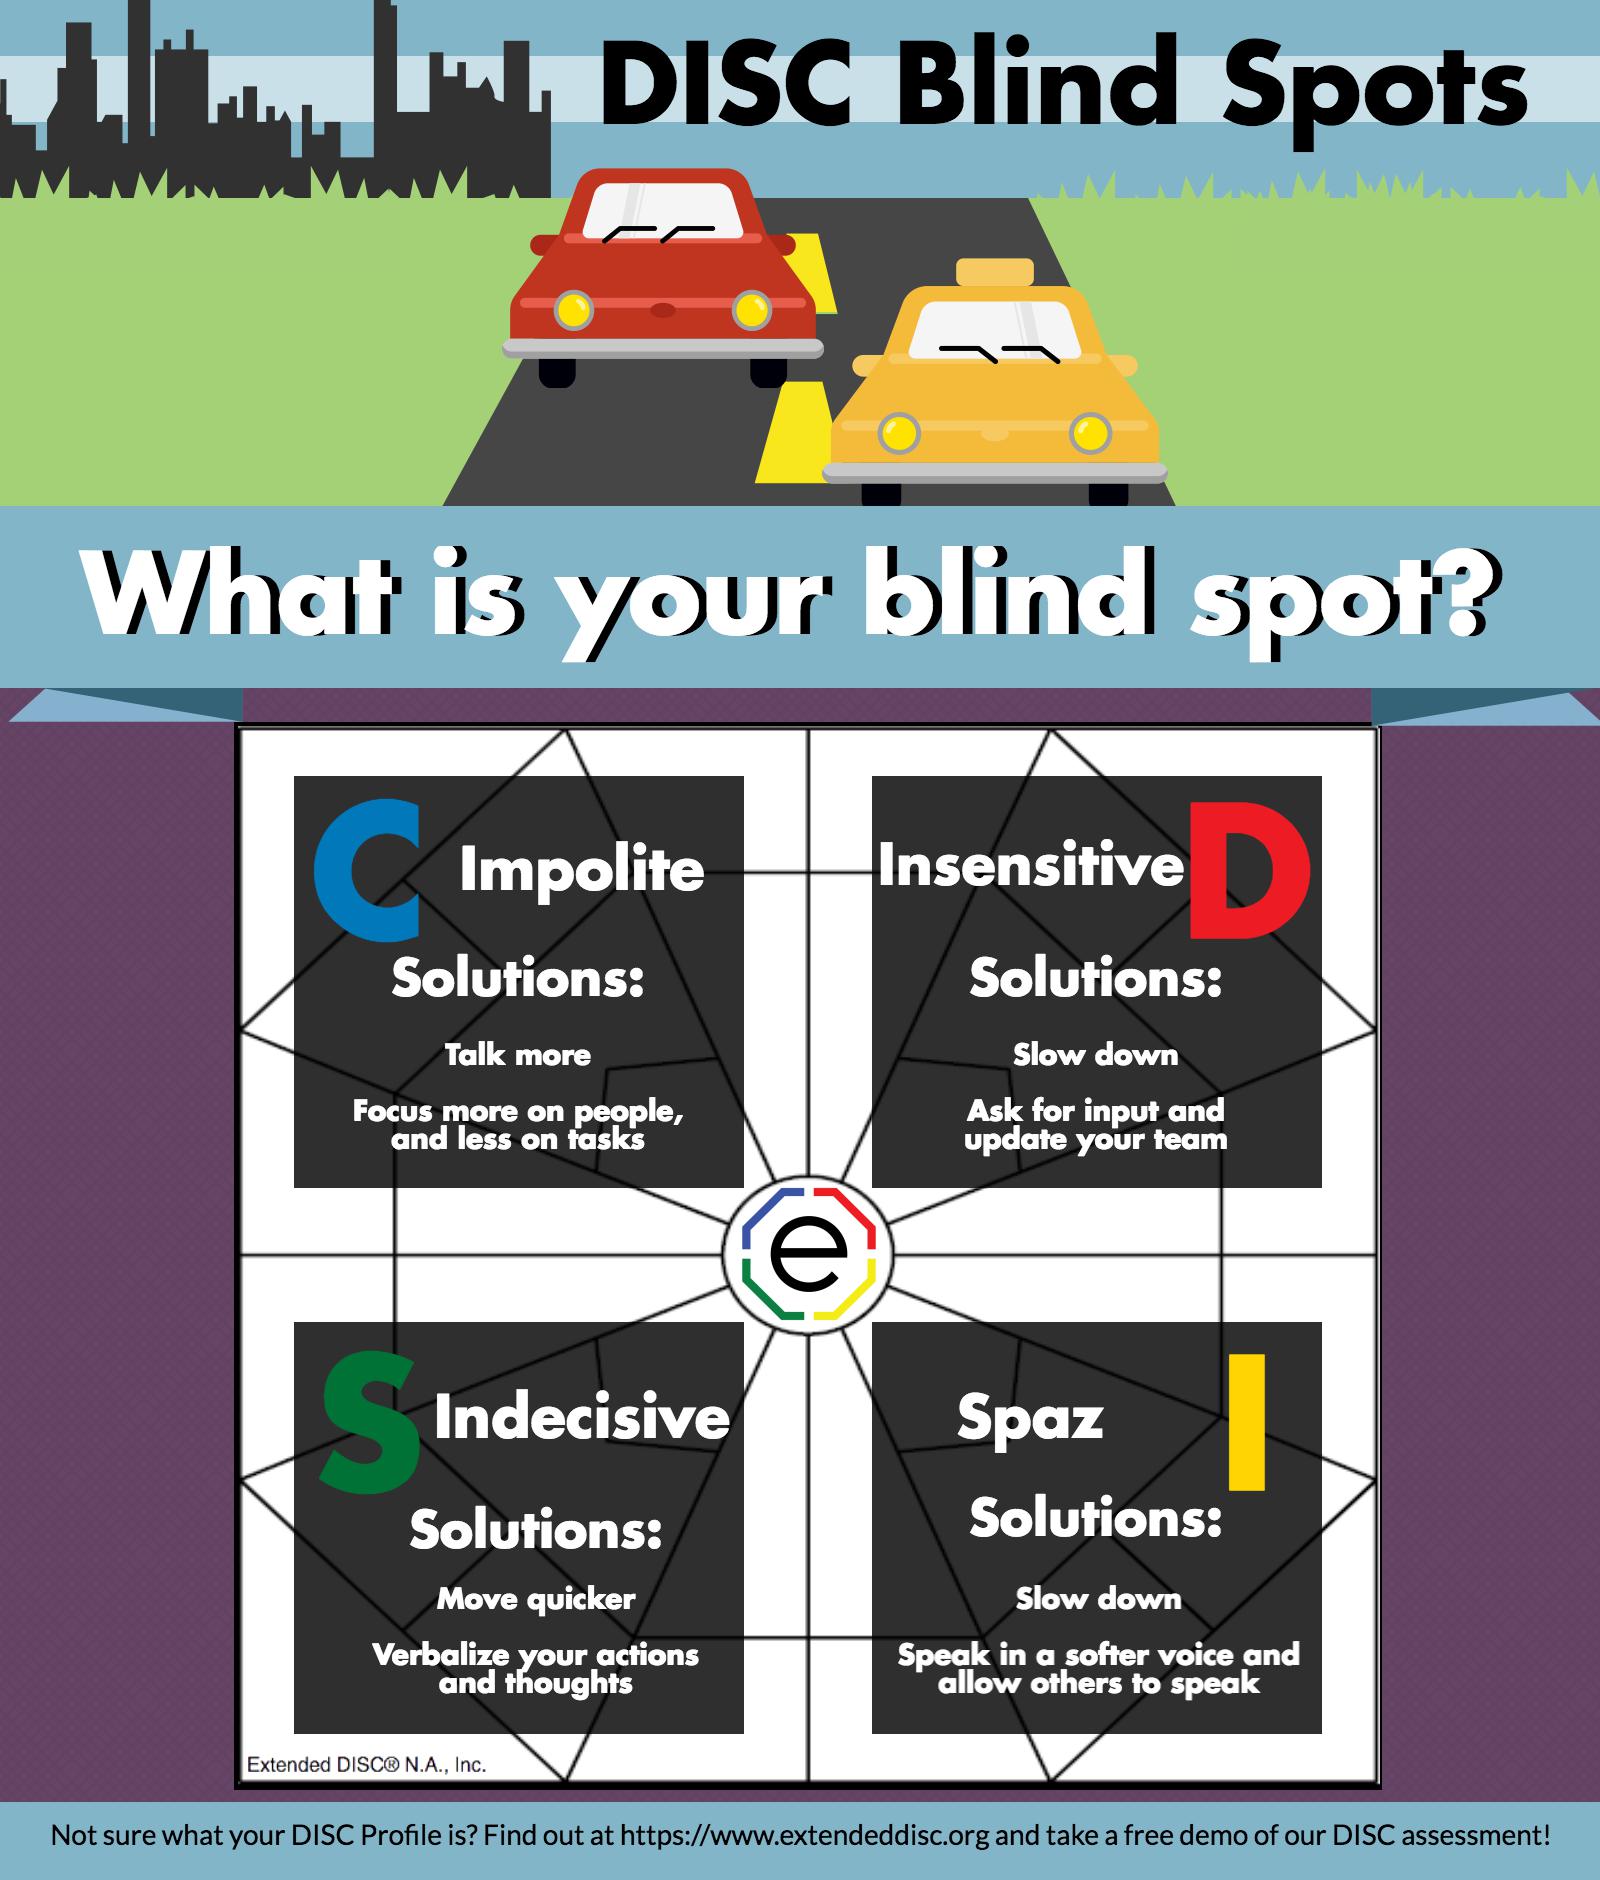 Blind Spot Meaning - driveJohnson's